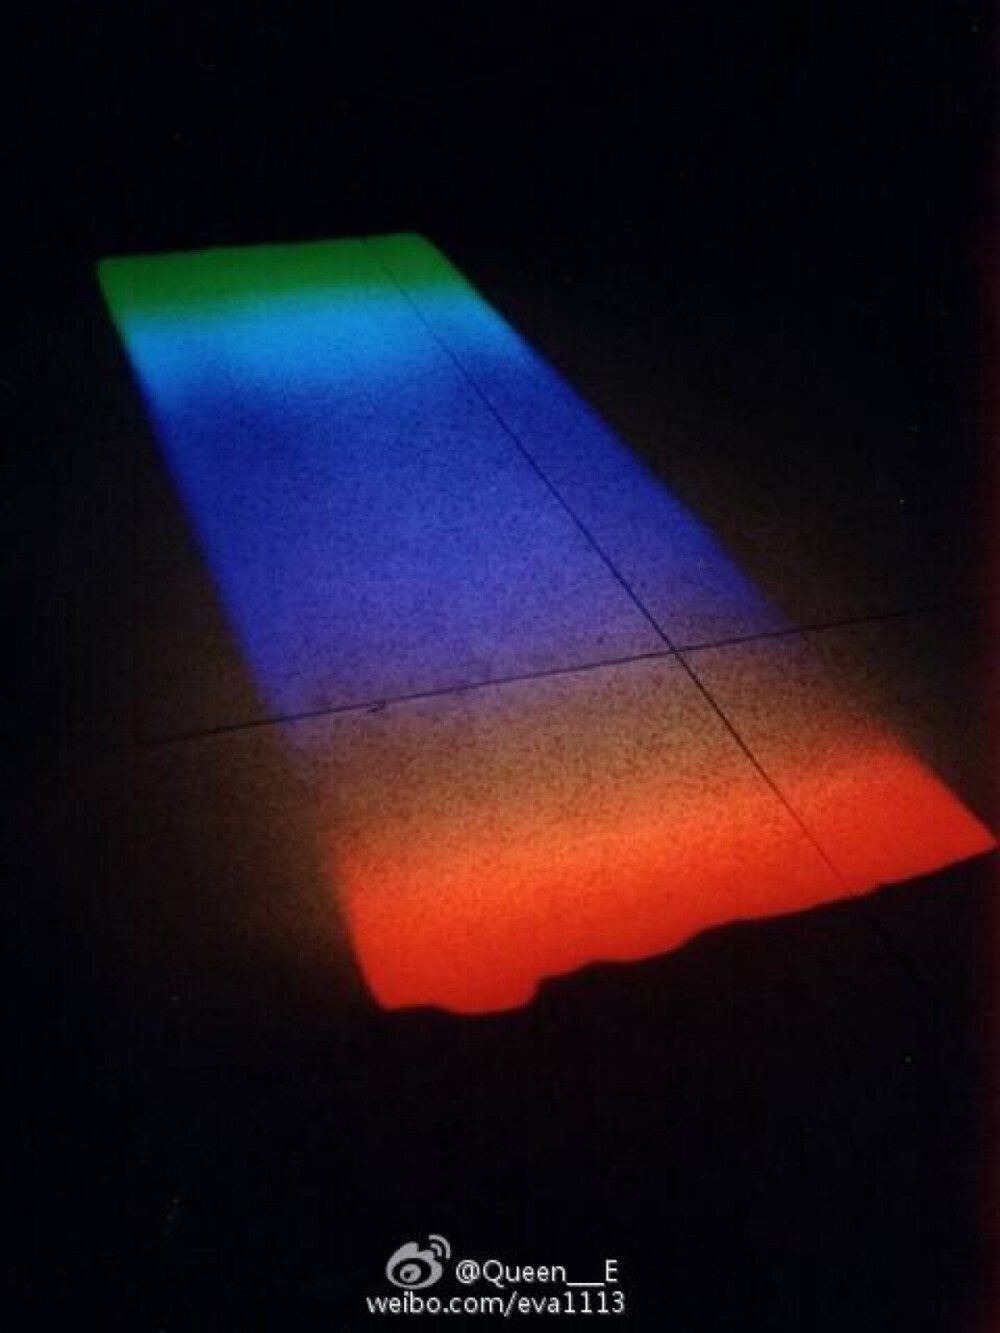 Peter Erskine (American, b. 1941, New Haven, CT, USA) - 1: Spectrum of Time, Rainbow Sundial calendar, 1999 Permanent Installations. 2,3,4,5: New Light On Rome, 2000 Spectrum Sunlight on Aula Stairs.Trajan’s Markets, Rome 112 AD. ​